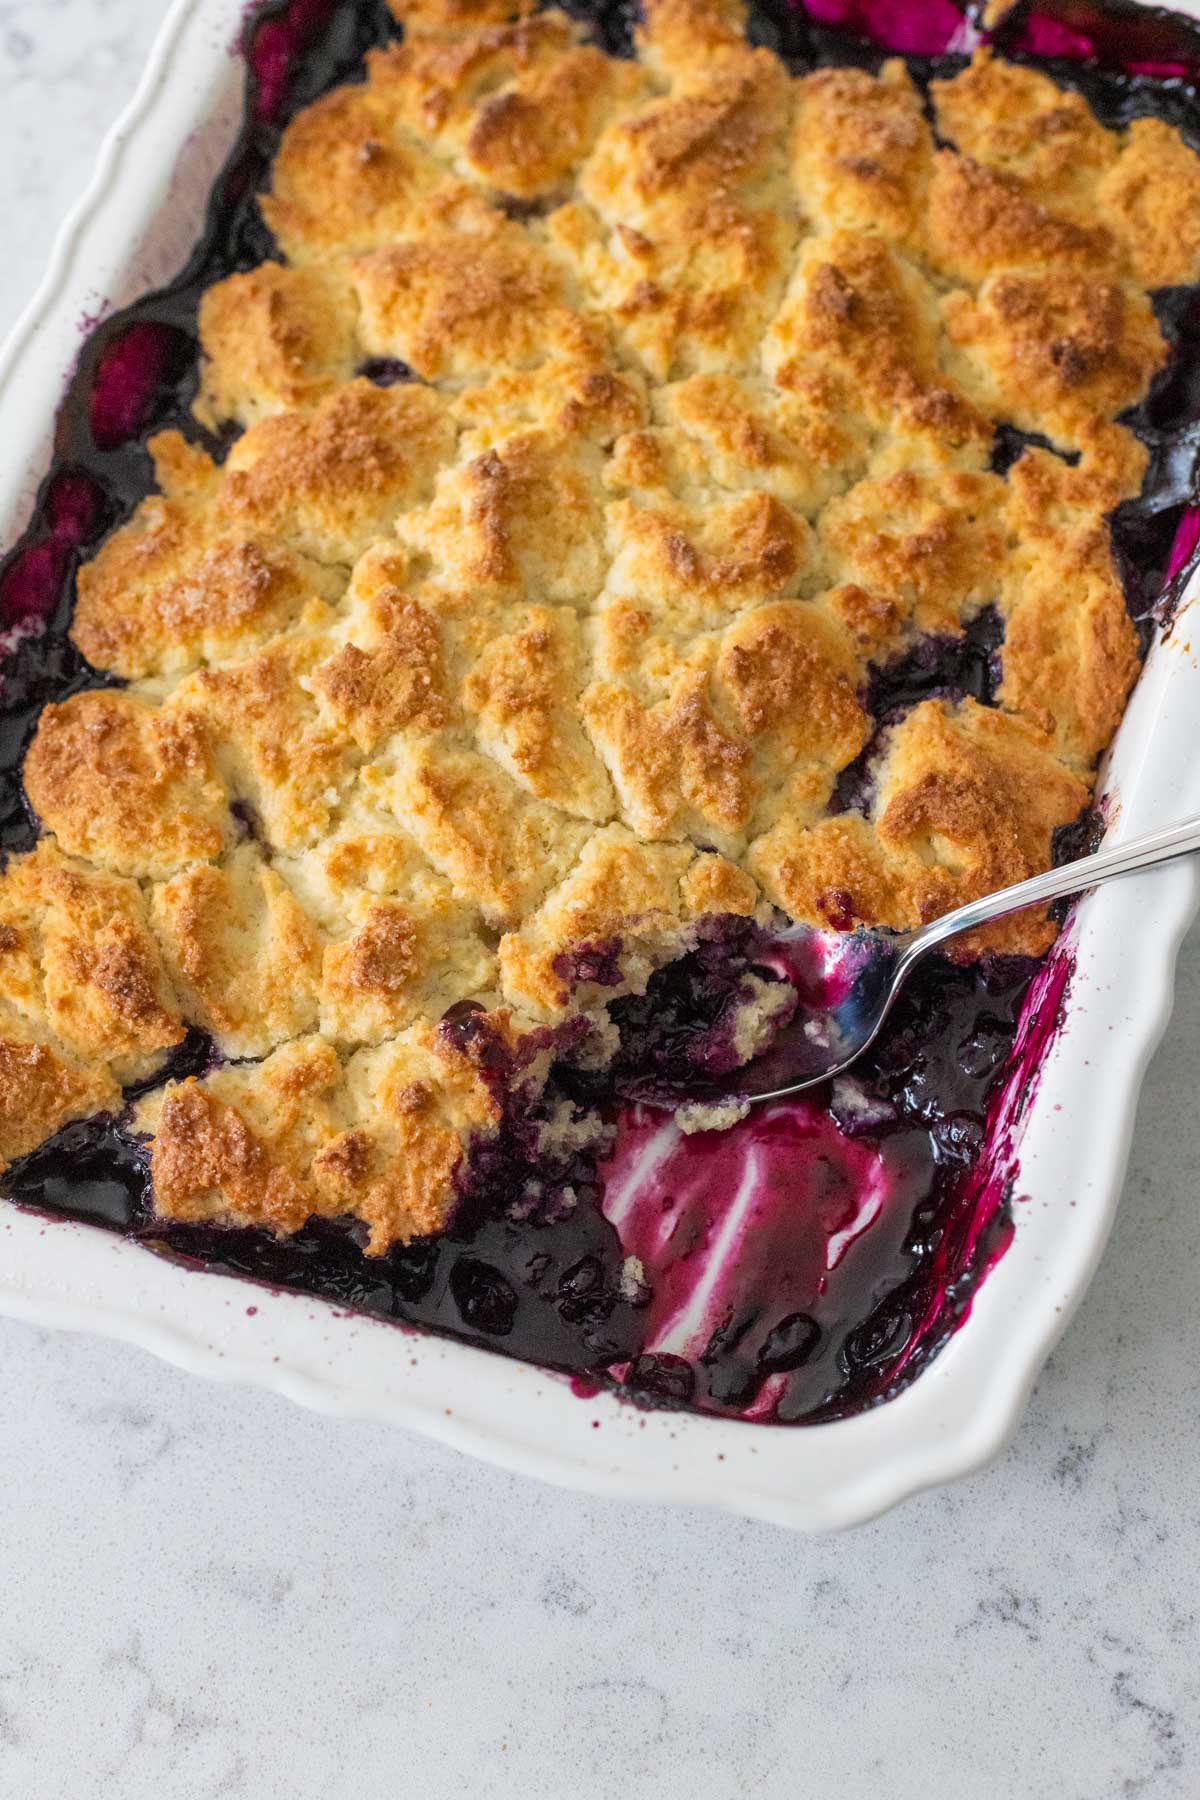 The finished cobbler has a spoon scraping out a serving. You can see the rich purple blueberry filling hiding under the golden brown topping.